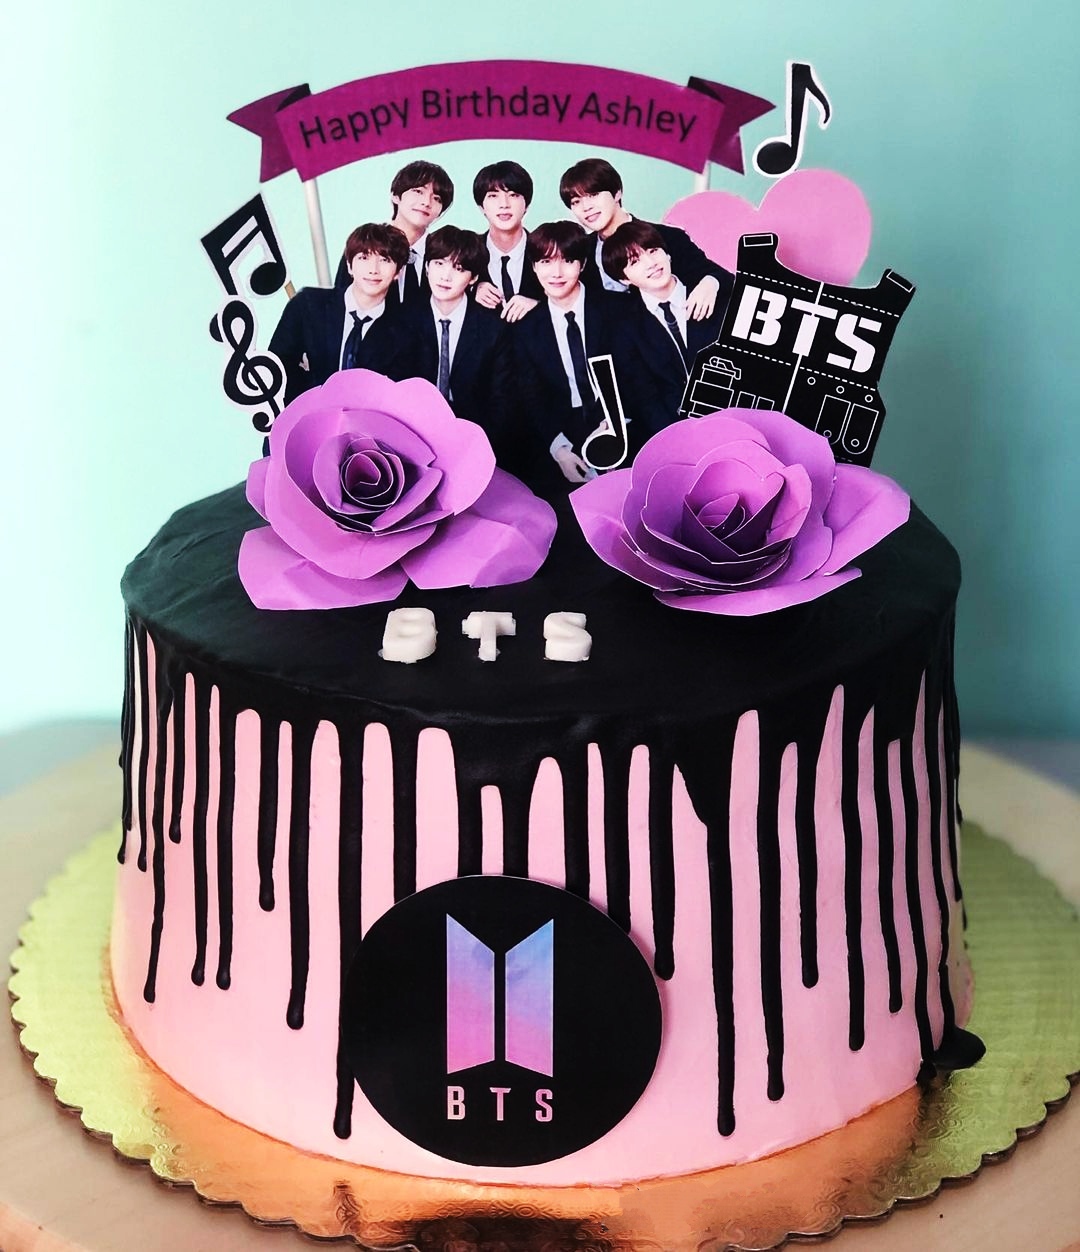 Search Results for “army bts” | Oh, Stef! Cakes